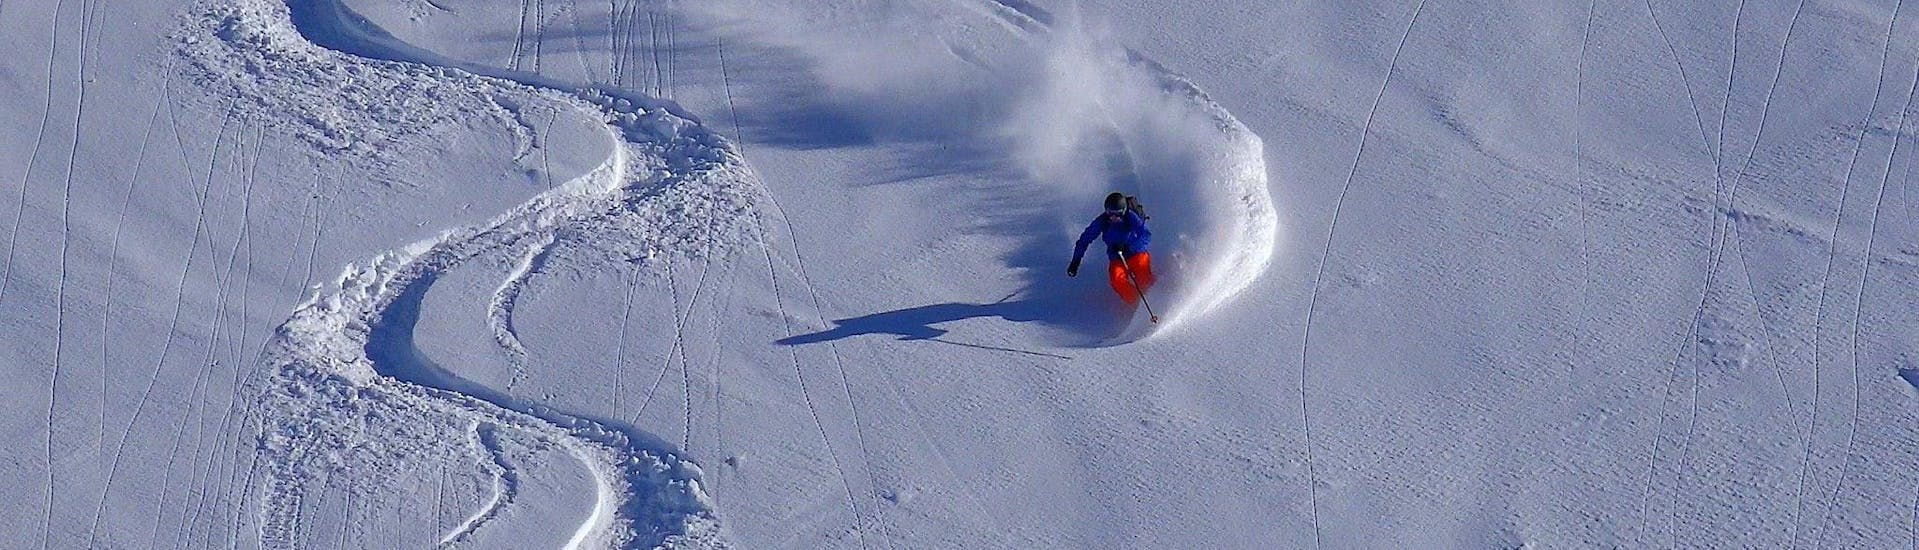 Private Off-Piste Skiing Lessons for Groups - Advanced.